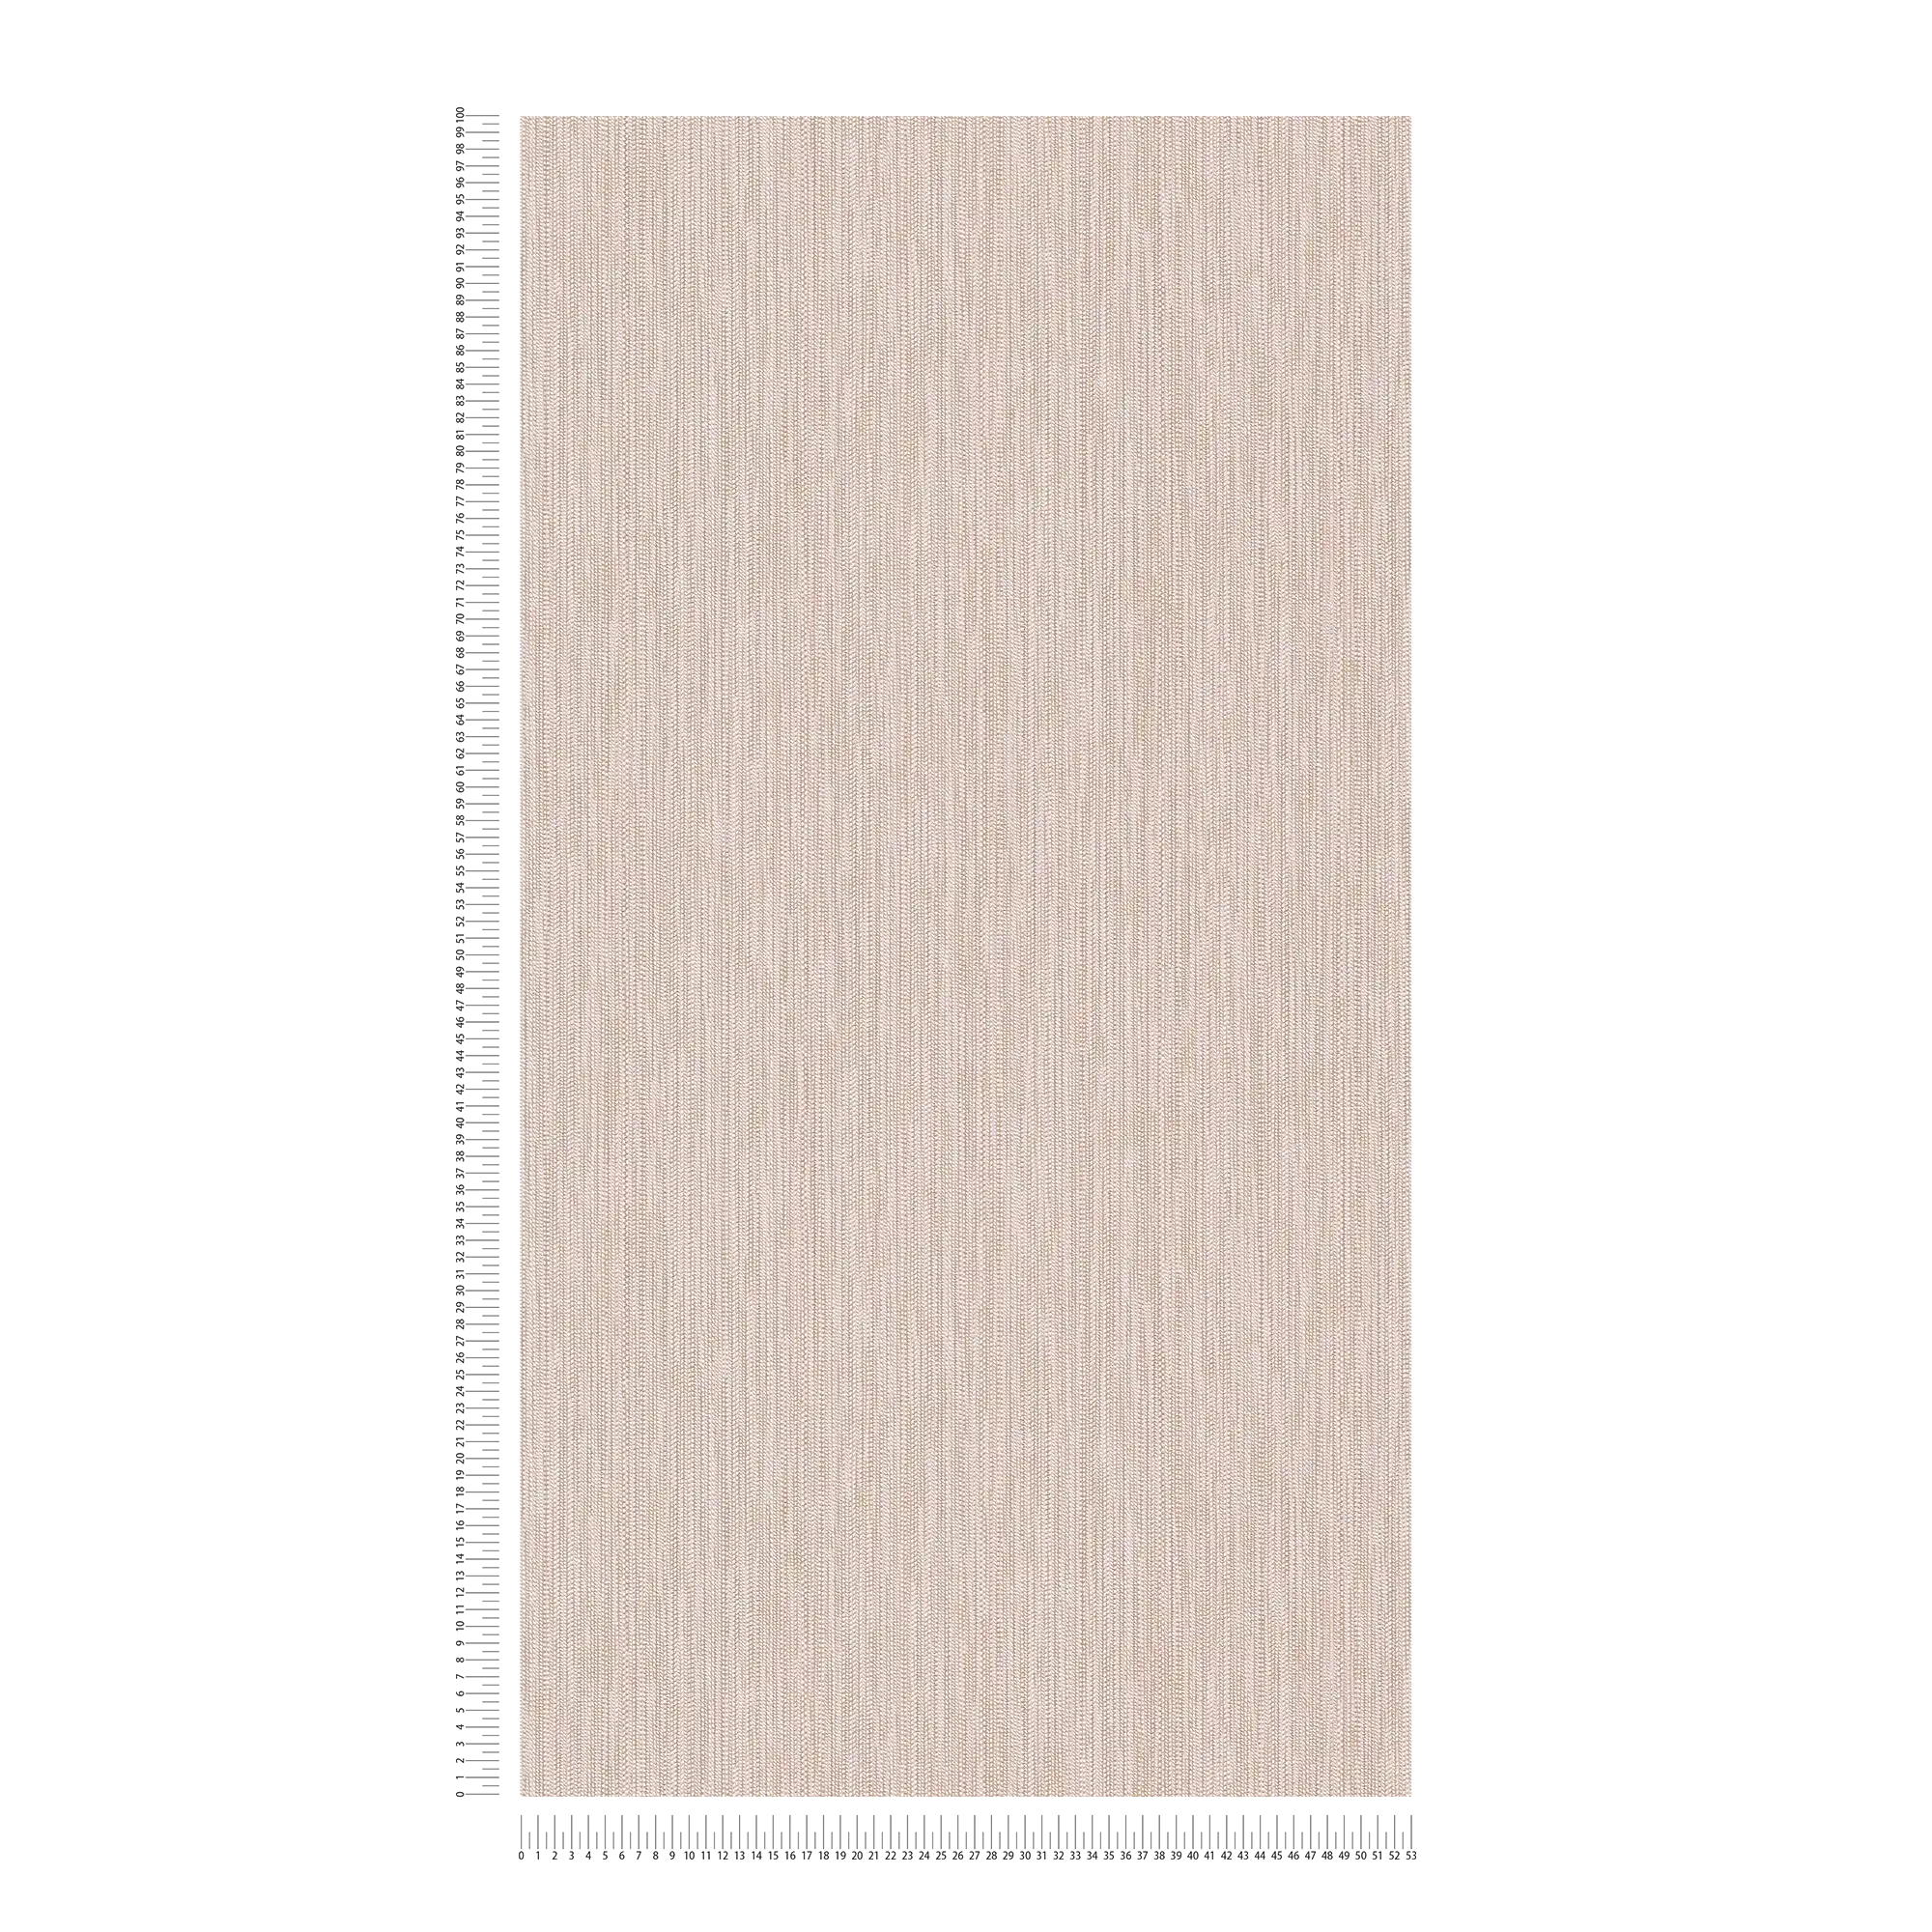             Multicoloured non-woven wallpaper with braid pattern - pink, grey, brown
        